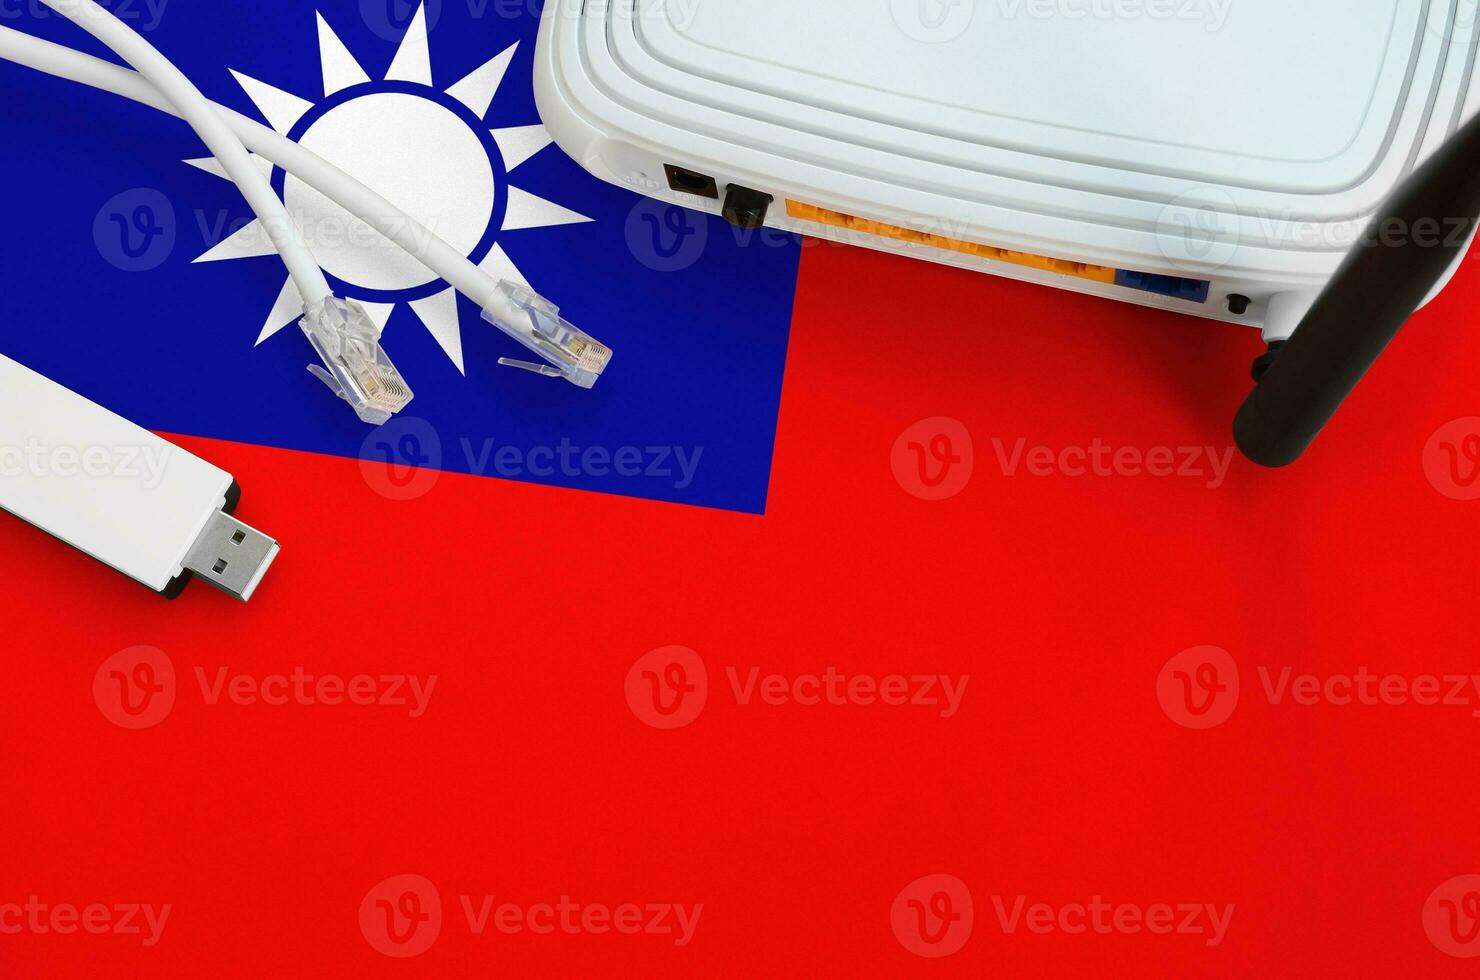 Taiwan flag depicted on table with internet rj45 cable, wireless usb wifi adapter and router. Internet connection concept photo